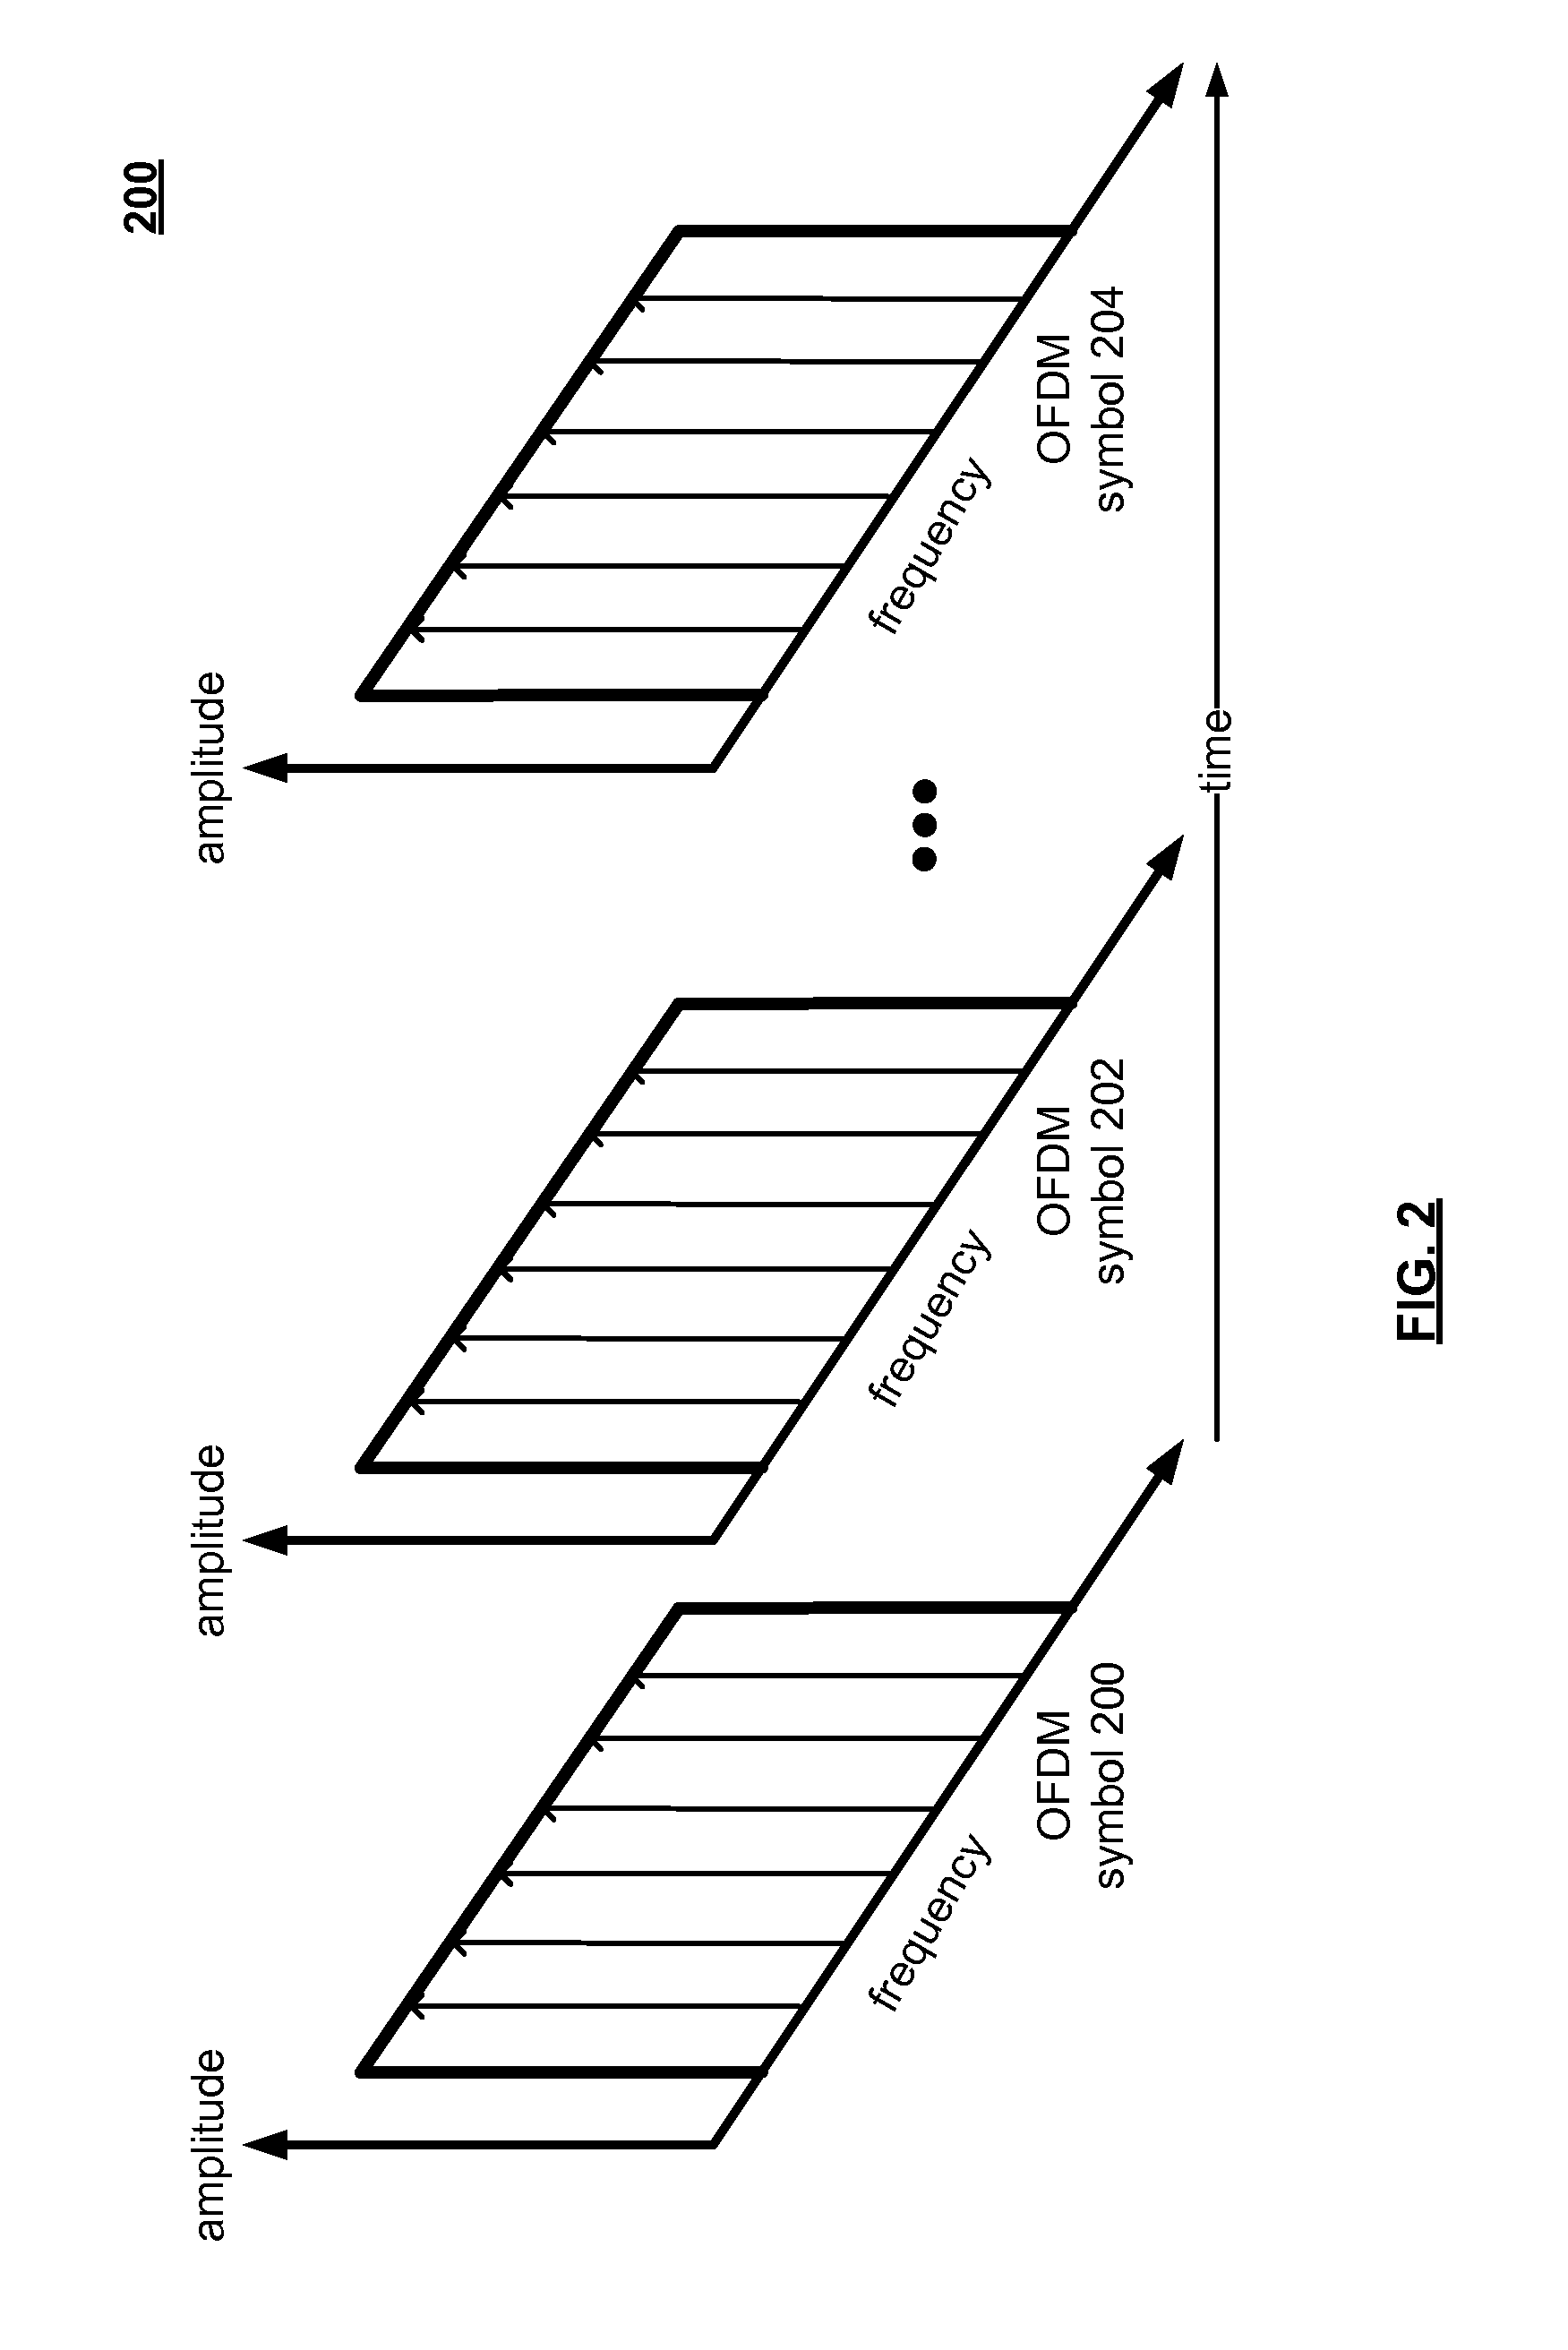 Frame adaptive digital to analog converter  and methods for use therewith